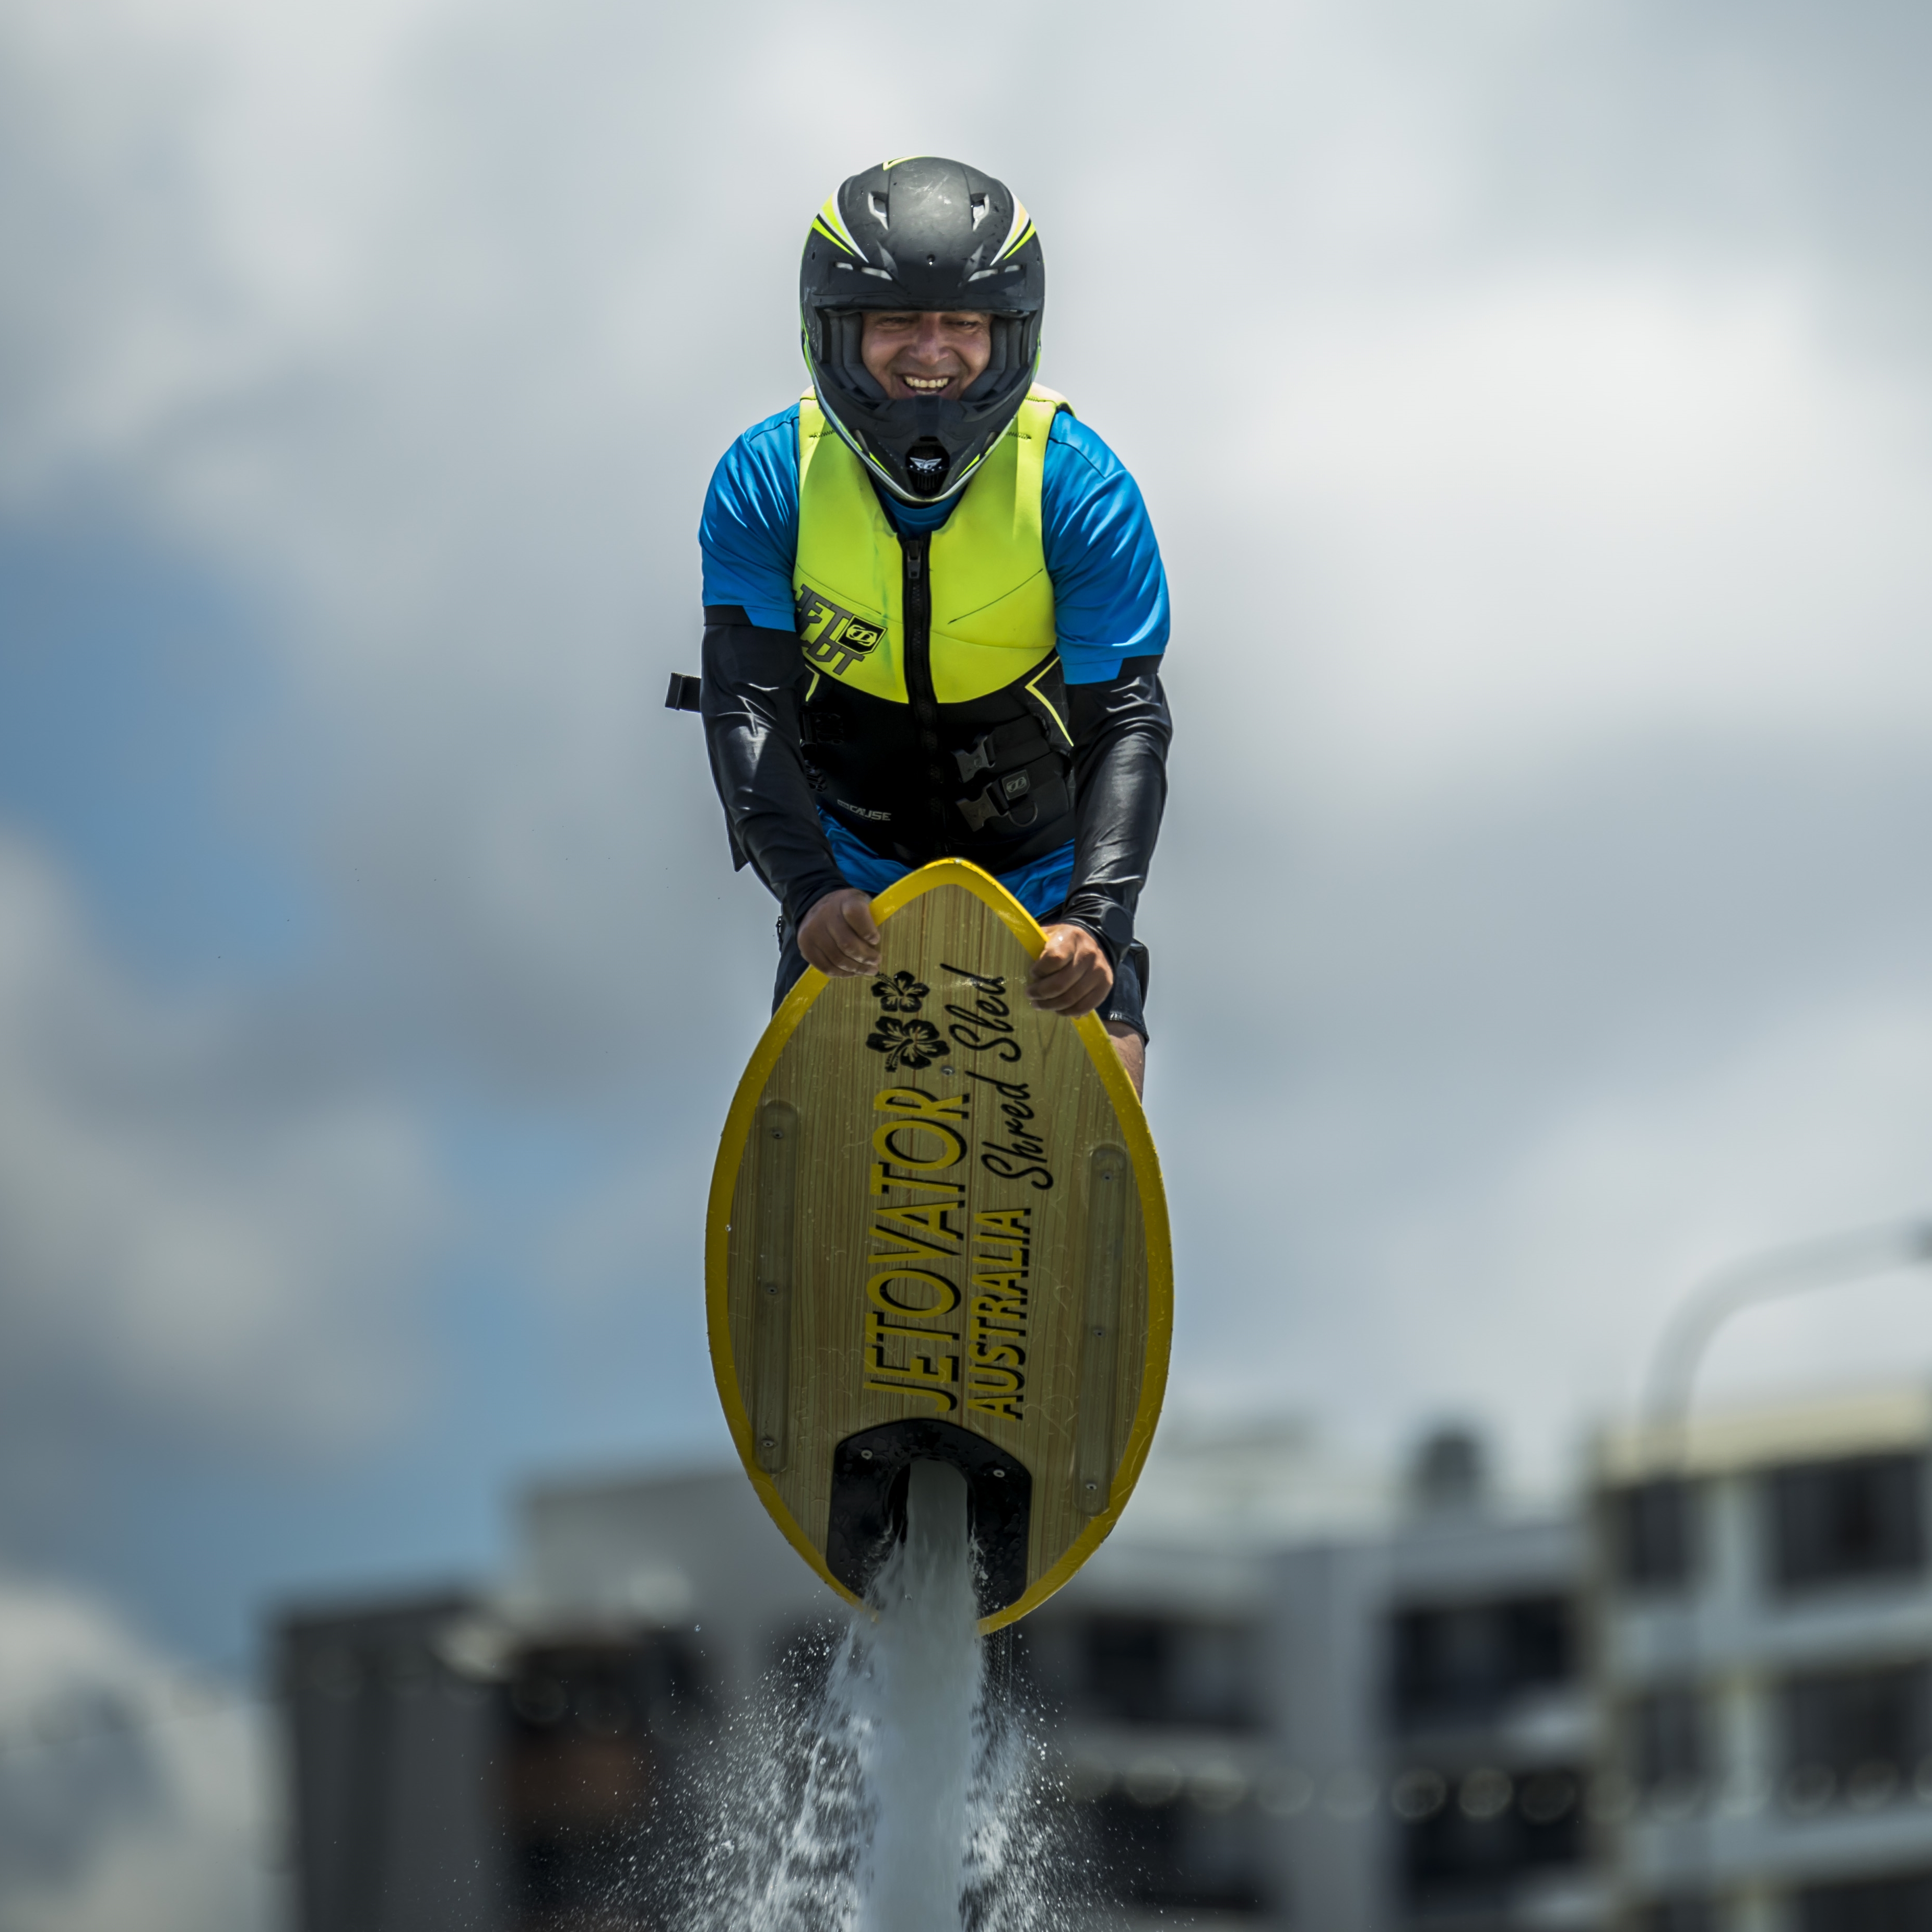 Shred Sled - The Flying Kneeboard